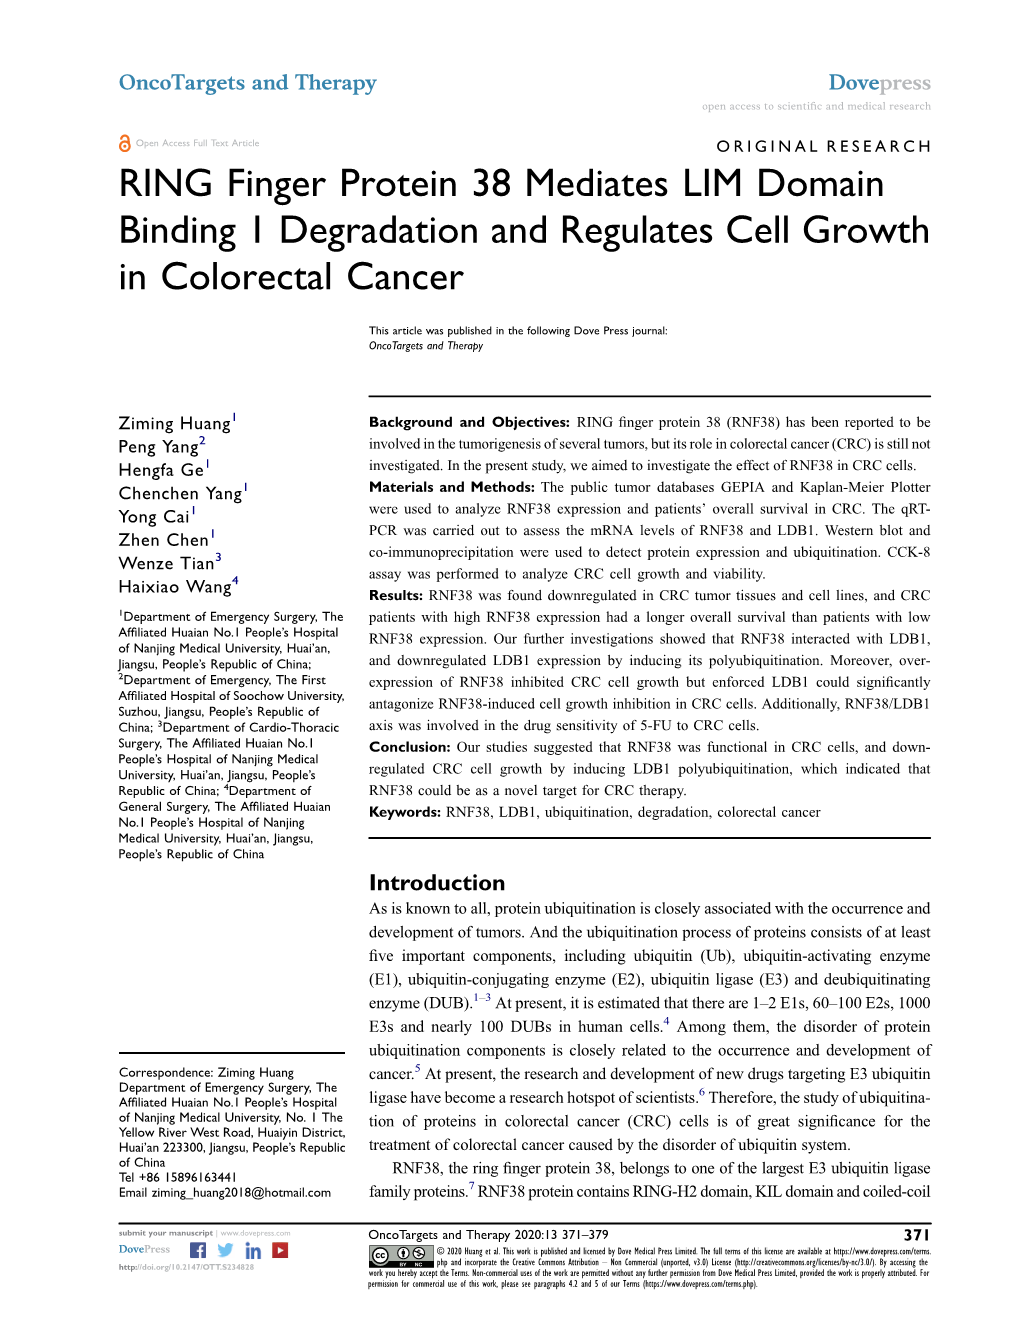 RING Finger Protein 38 Mediates LIM Domain Binding 1 Degradation and Regulates Cell Growth in Colorectal Cancer